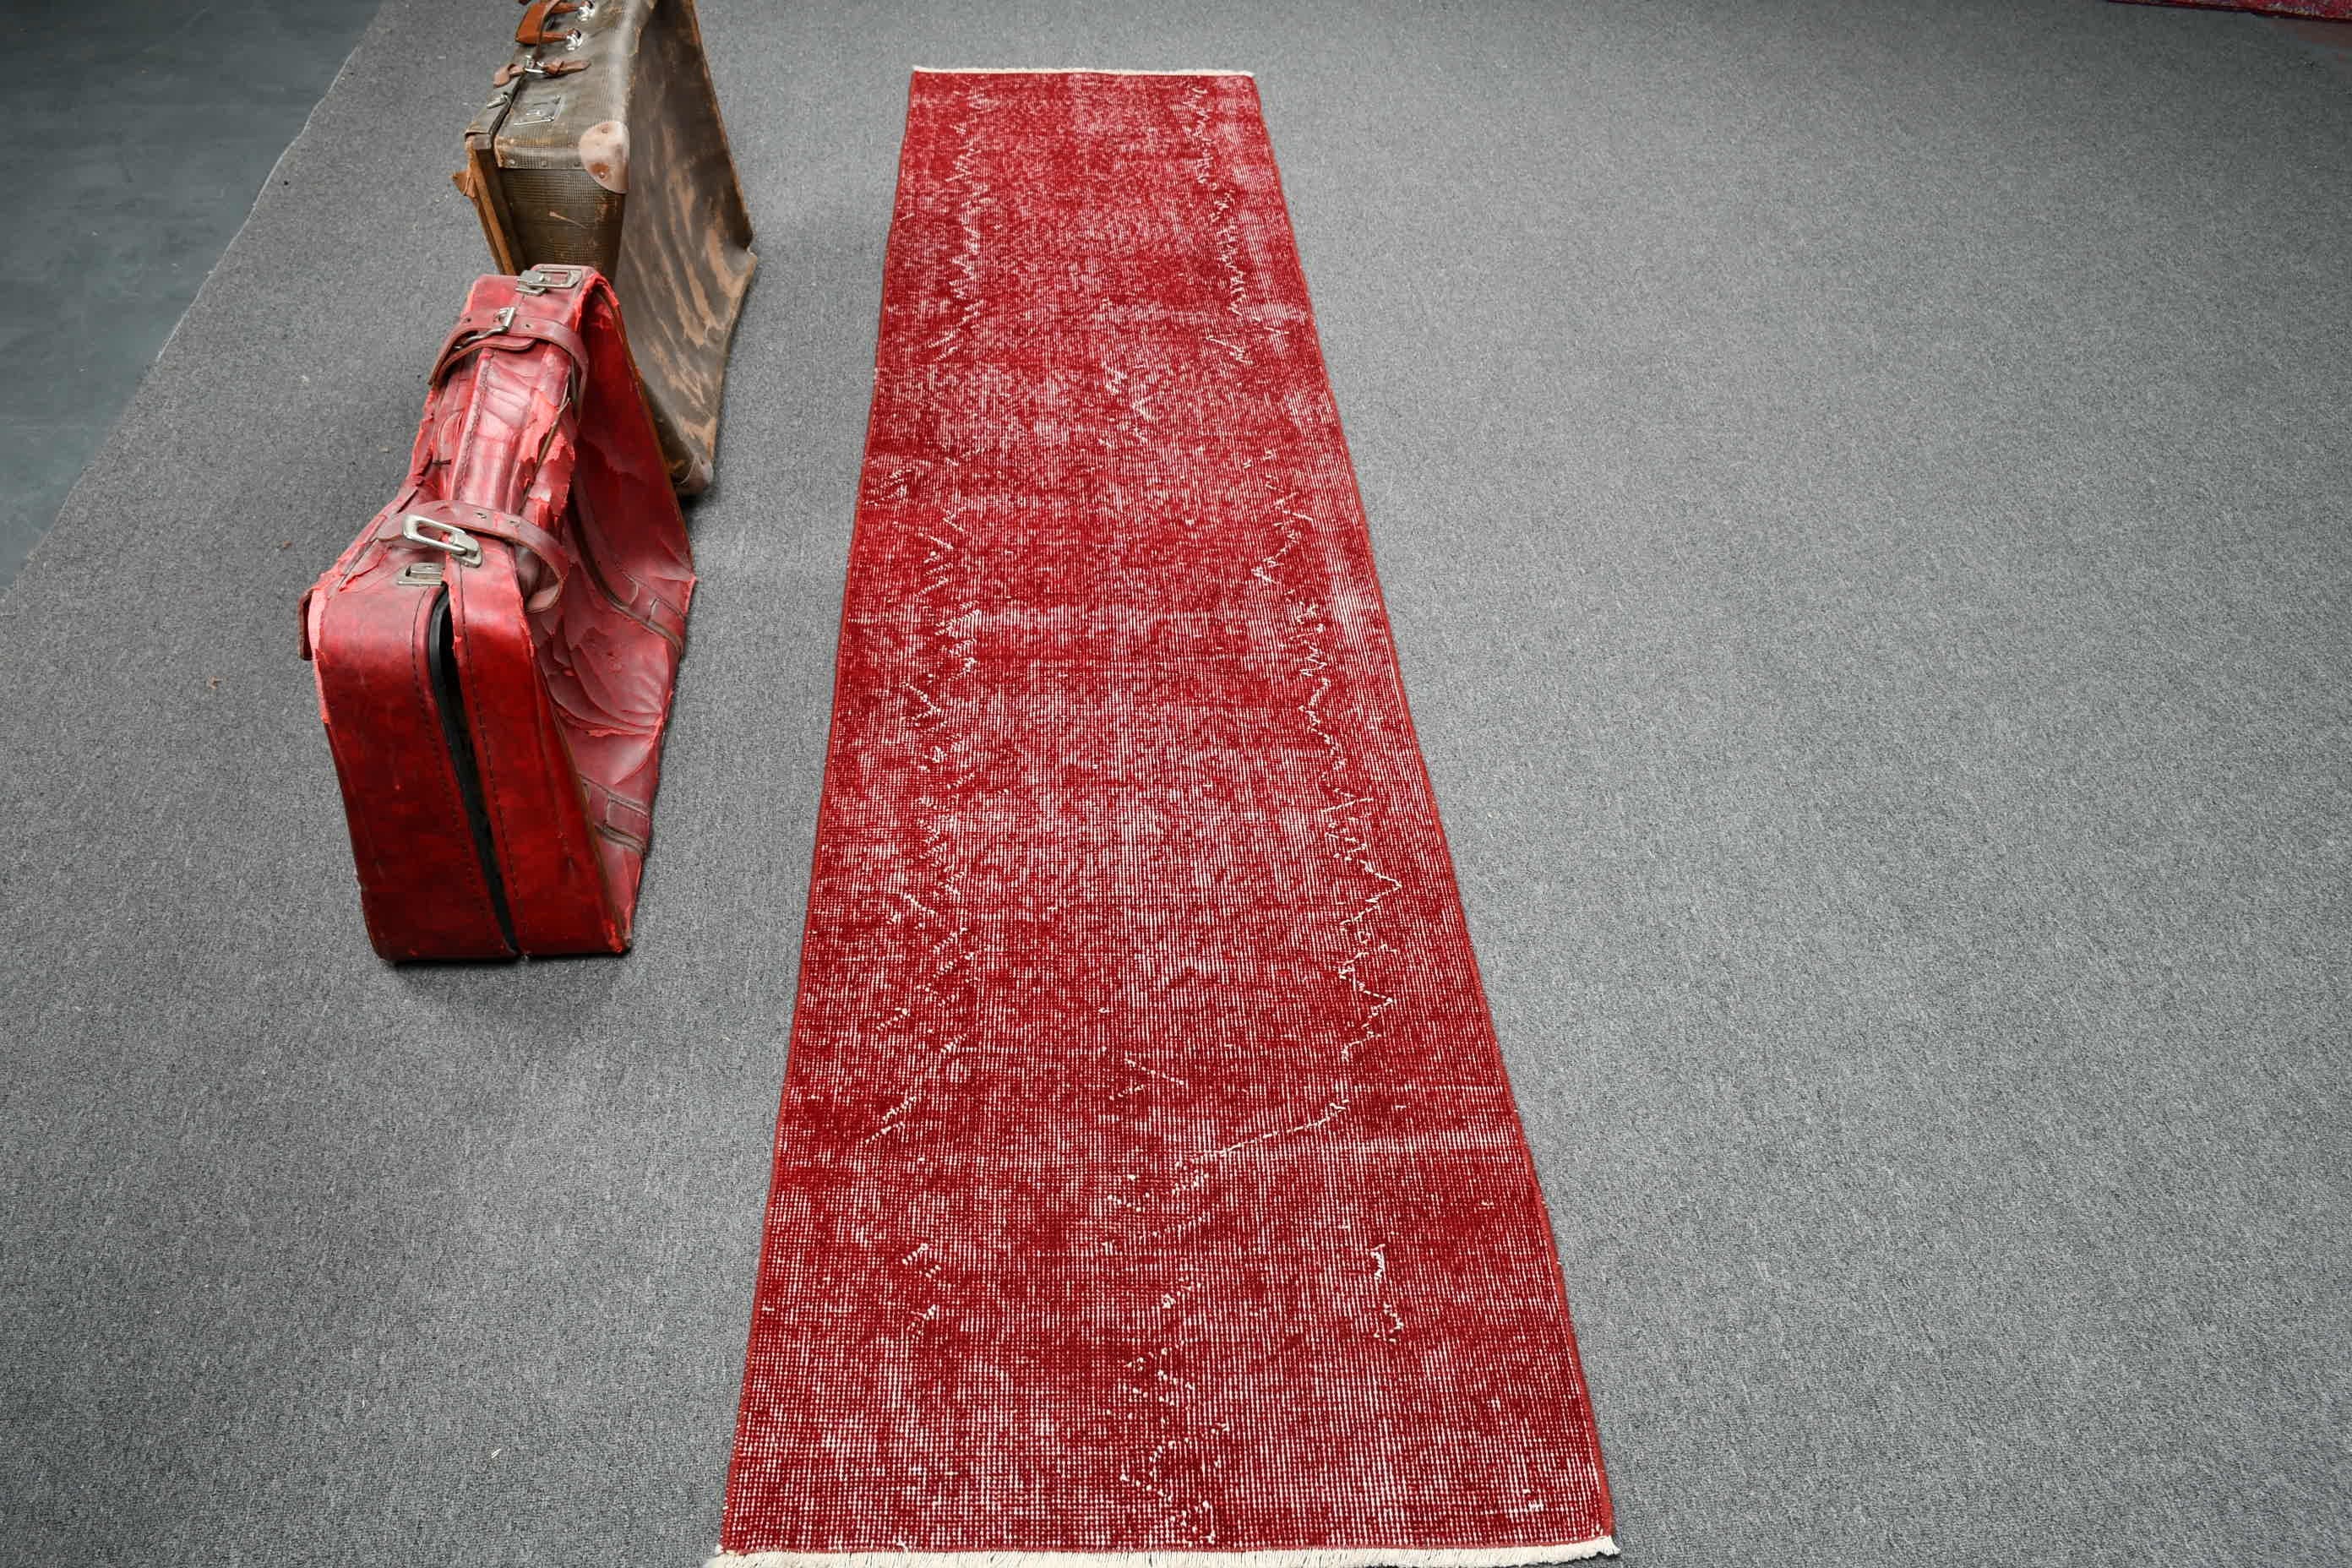 Antique Rug, Outdoor Rugs, Turkish Rugs, Rugs for Kitchen, Red Kitchen Rug, Kitchen Rug, Vintage Rug, Stair Rug, 2.1x9.2 ft Runner Rug